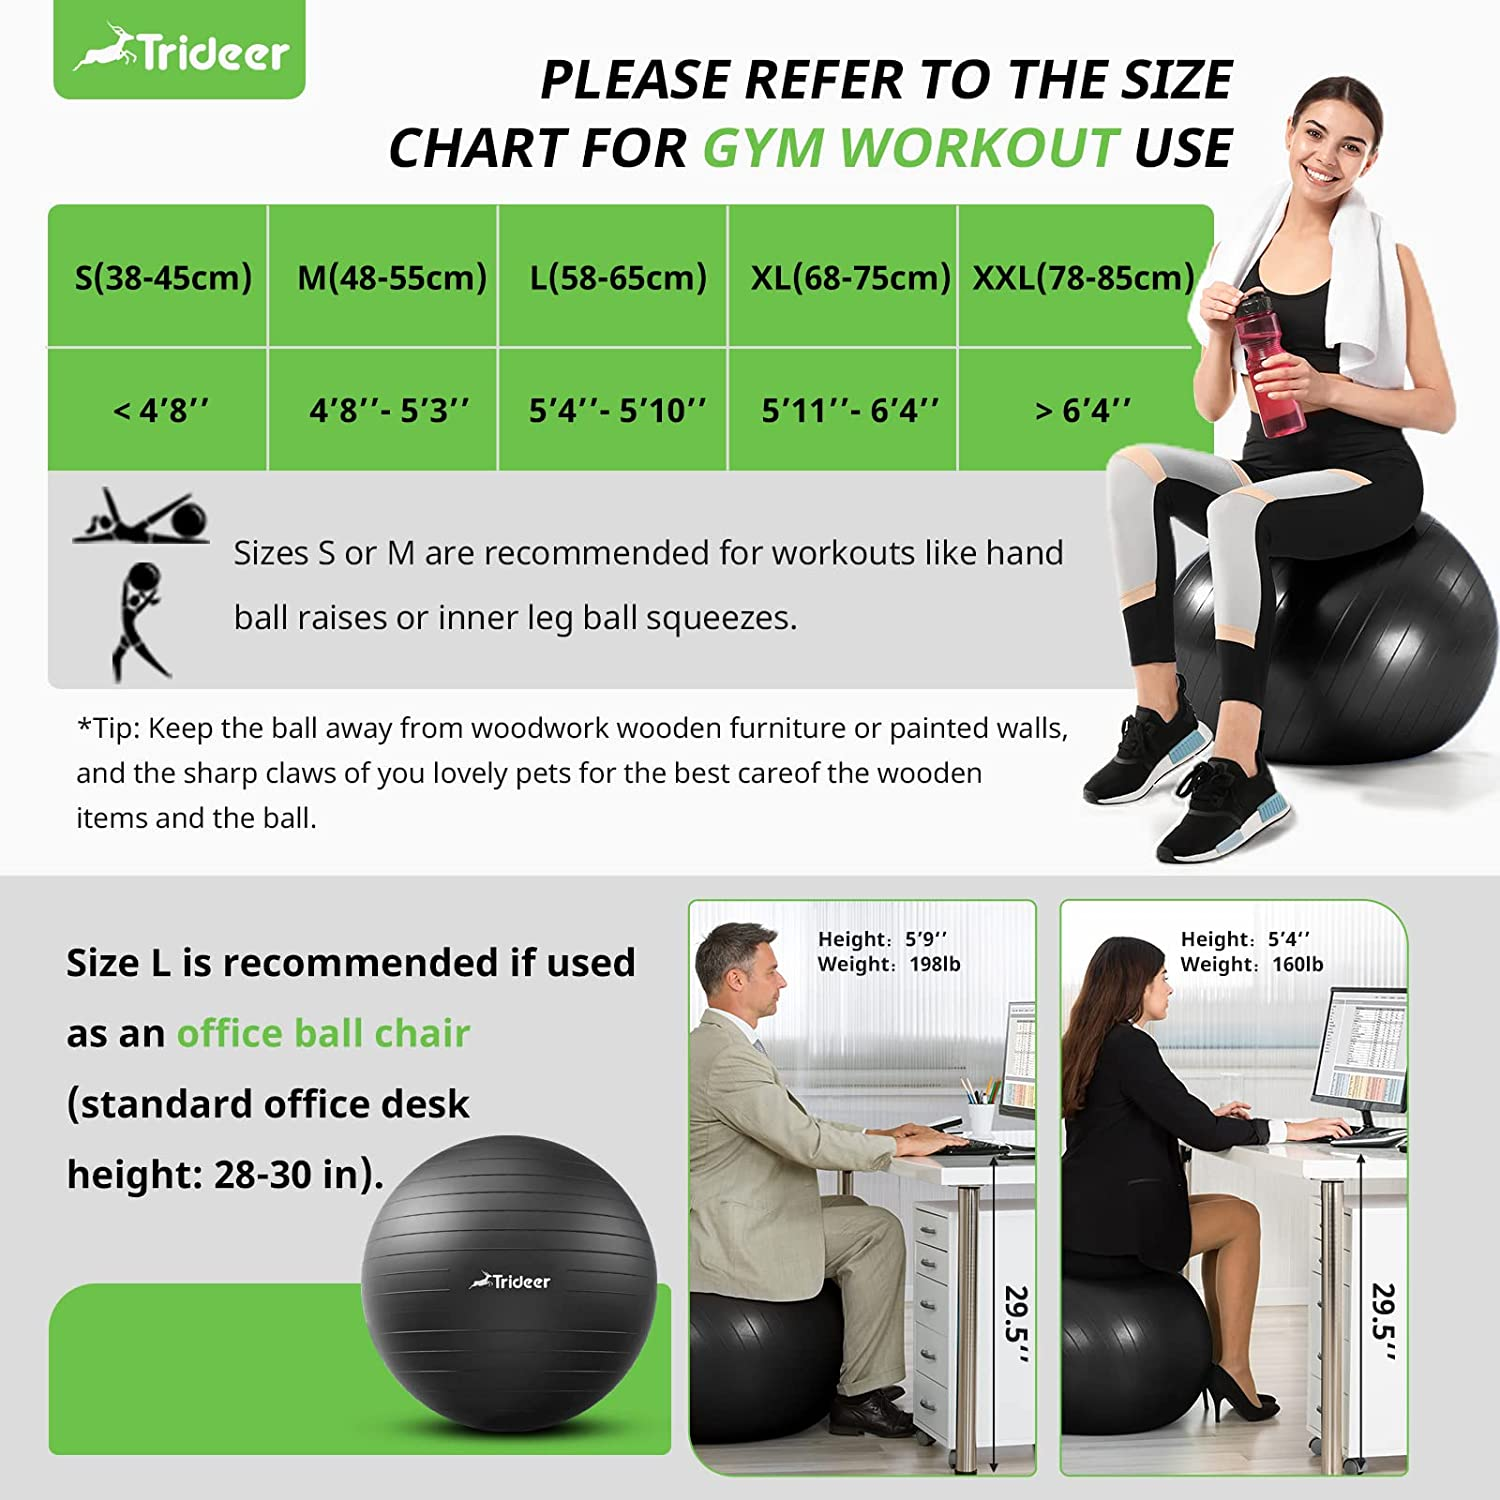 Yoga Ball Exercise Ball, 5 Sizes Ball Chair, Heavy Duty Swiss Ball for Balance, Stability, Pregnancy and Physical Therapy, Quick Pump Included